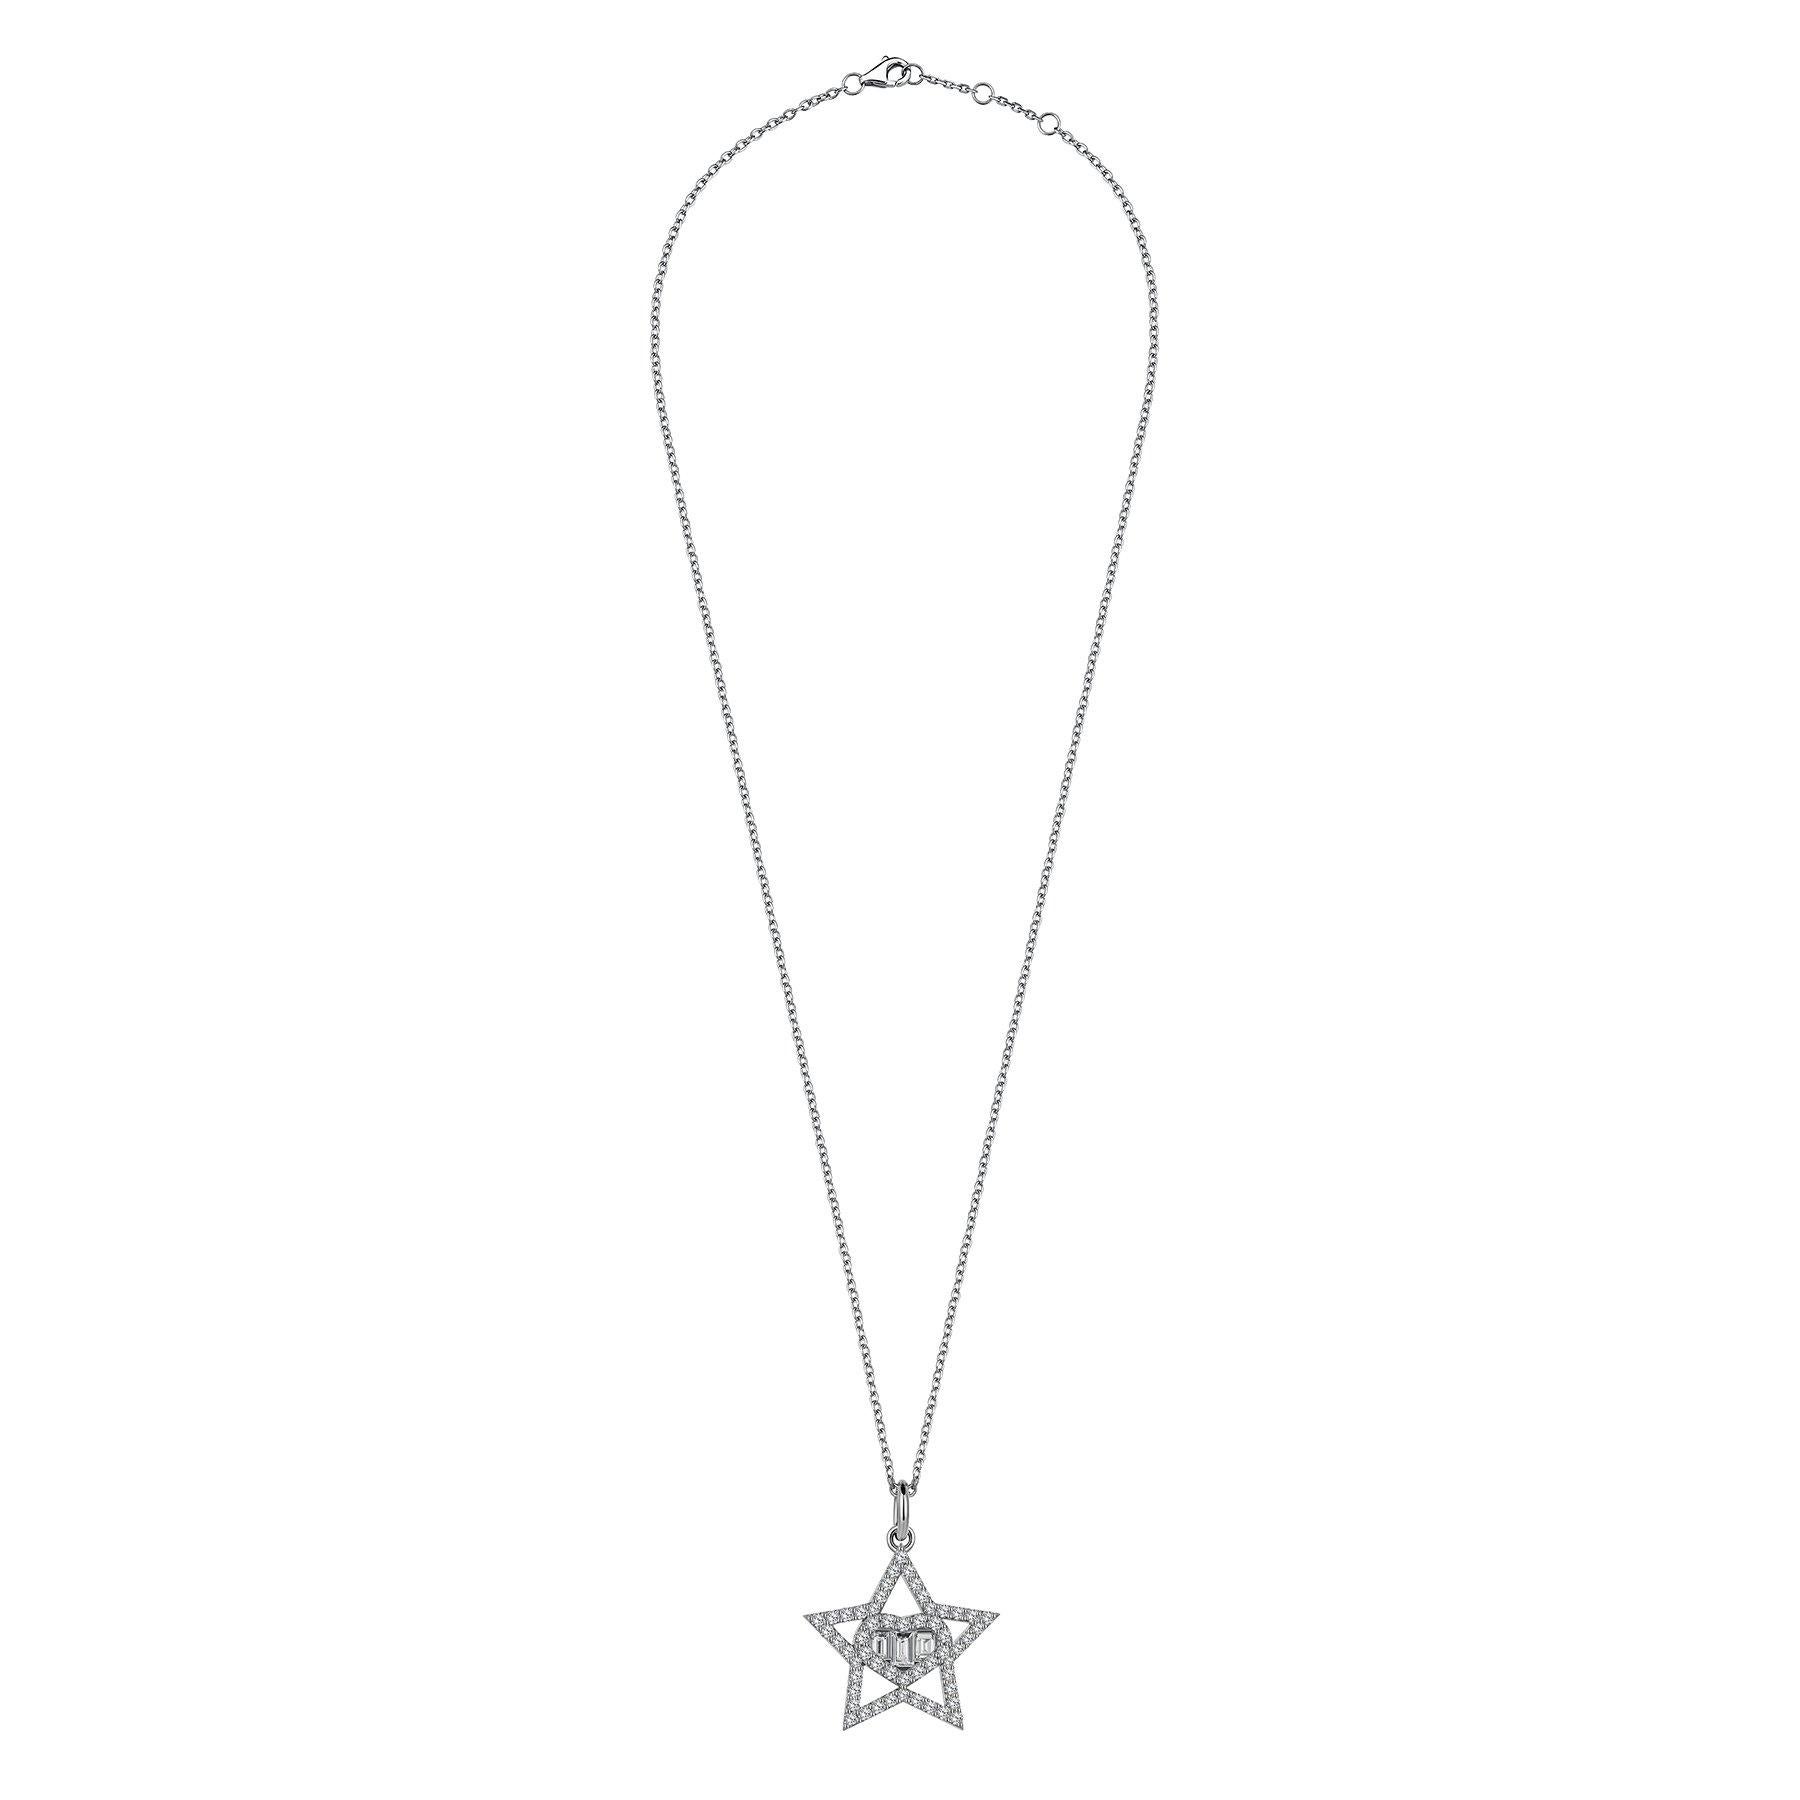 star of david necklace meaning